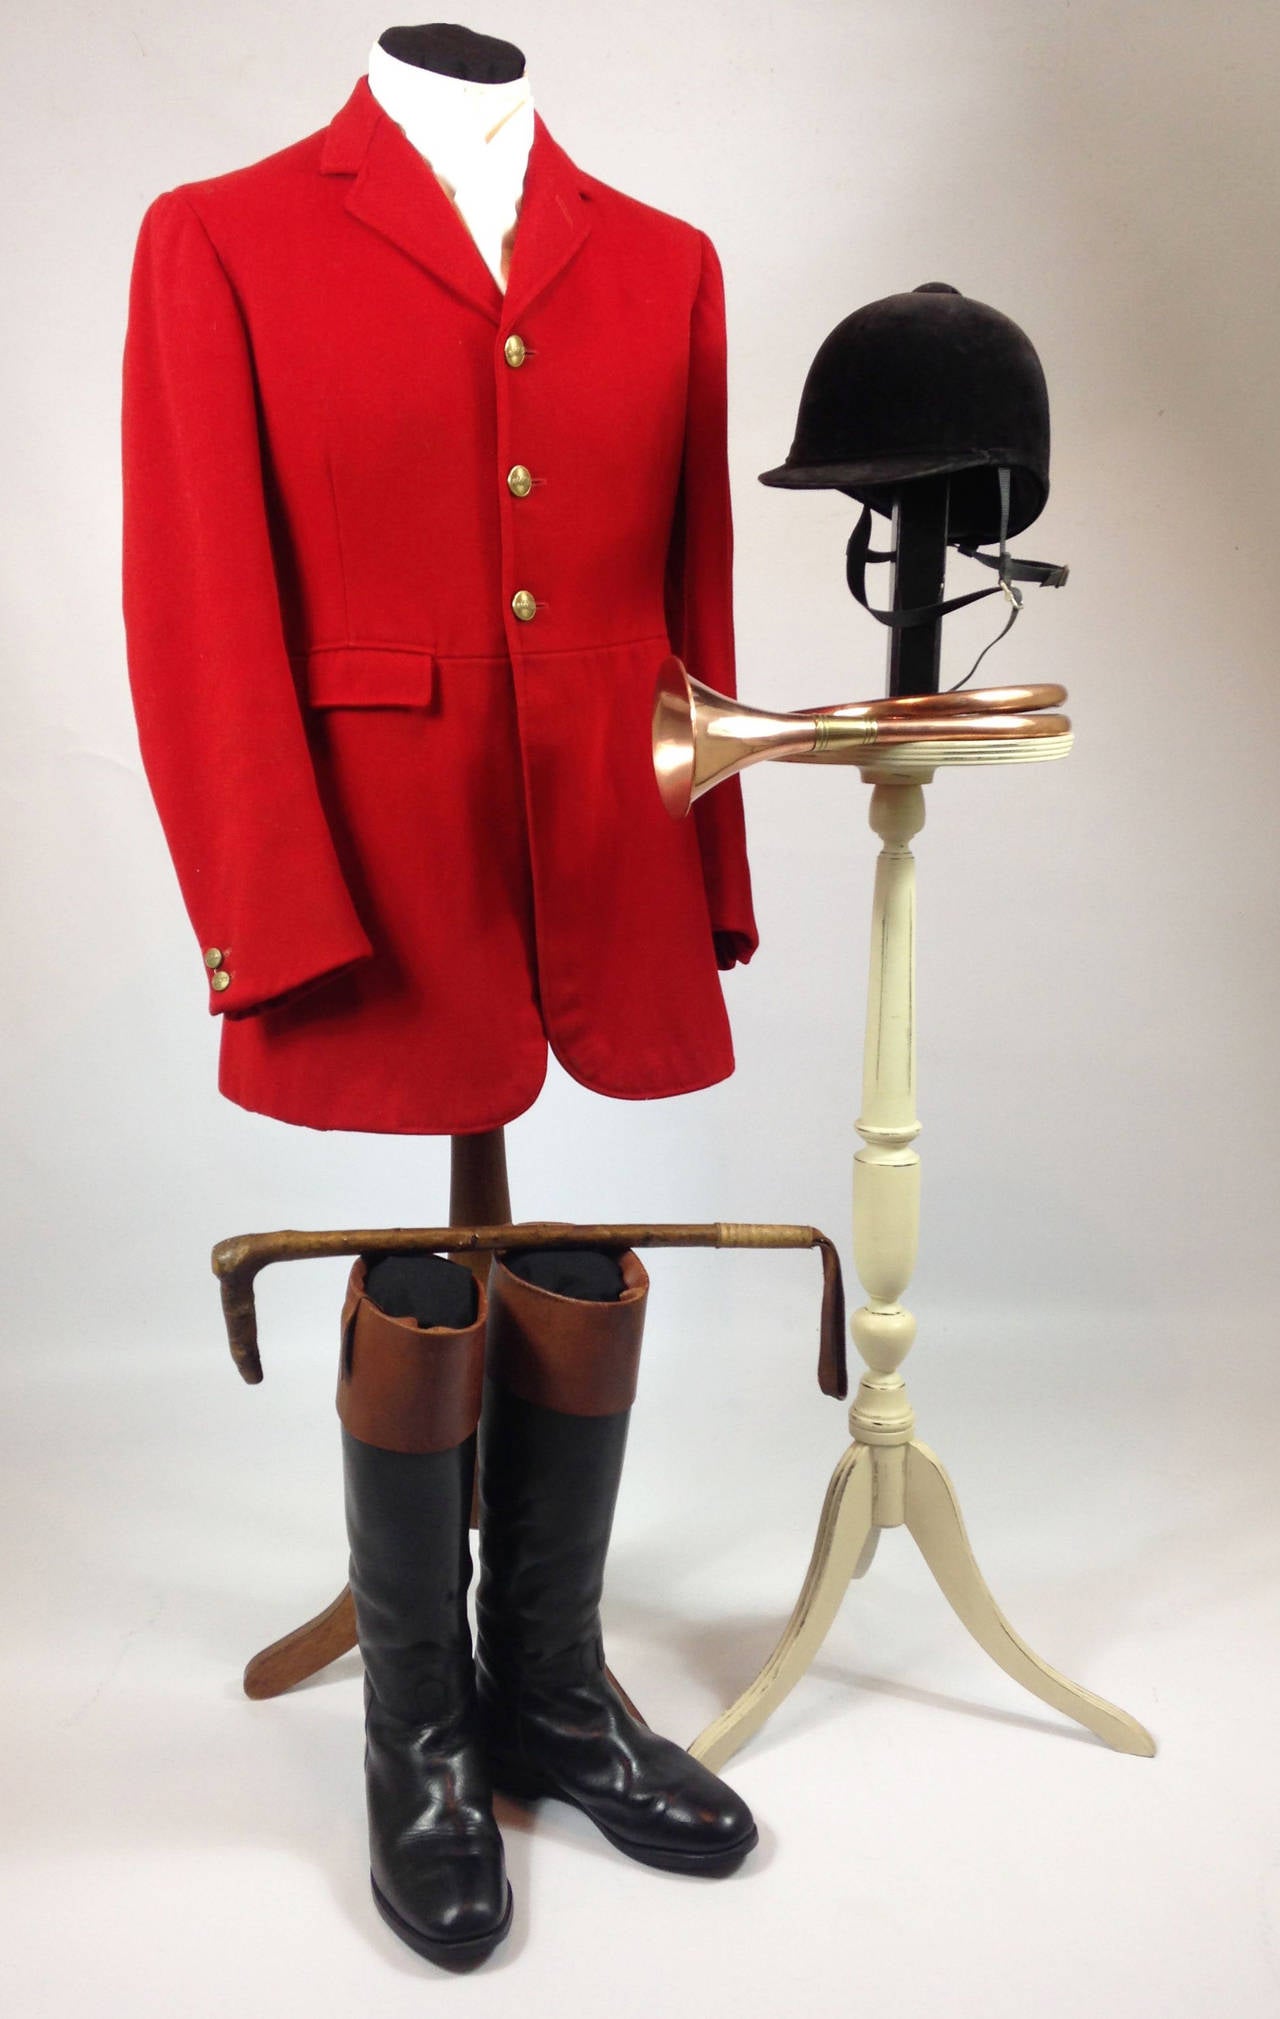 A very rare and decorative mid-20th century English hunt ensemble.

The group consists of a hunting 'pink' coat of heavy wool and cloth by Hogg, Sons & J.B. Johnstone Ltd of London with a full set of buttons to the Vale of White Horse,